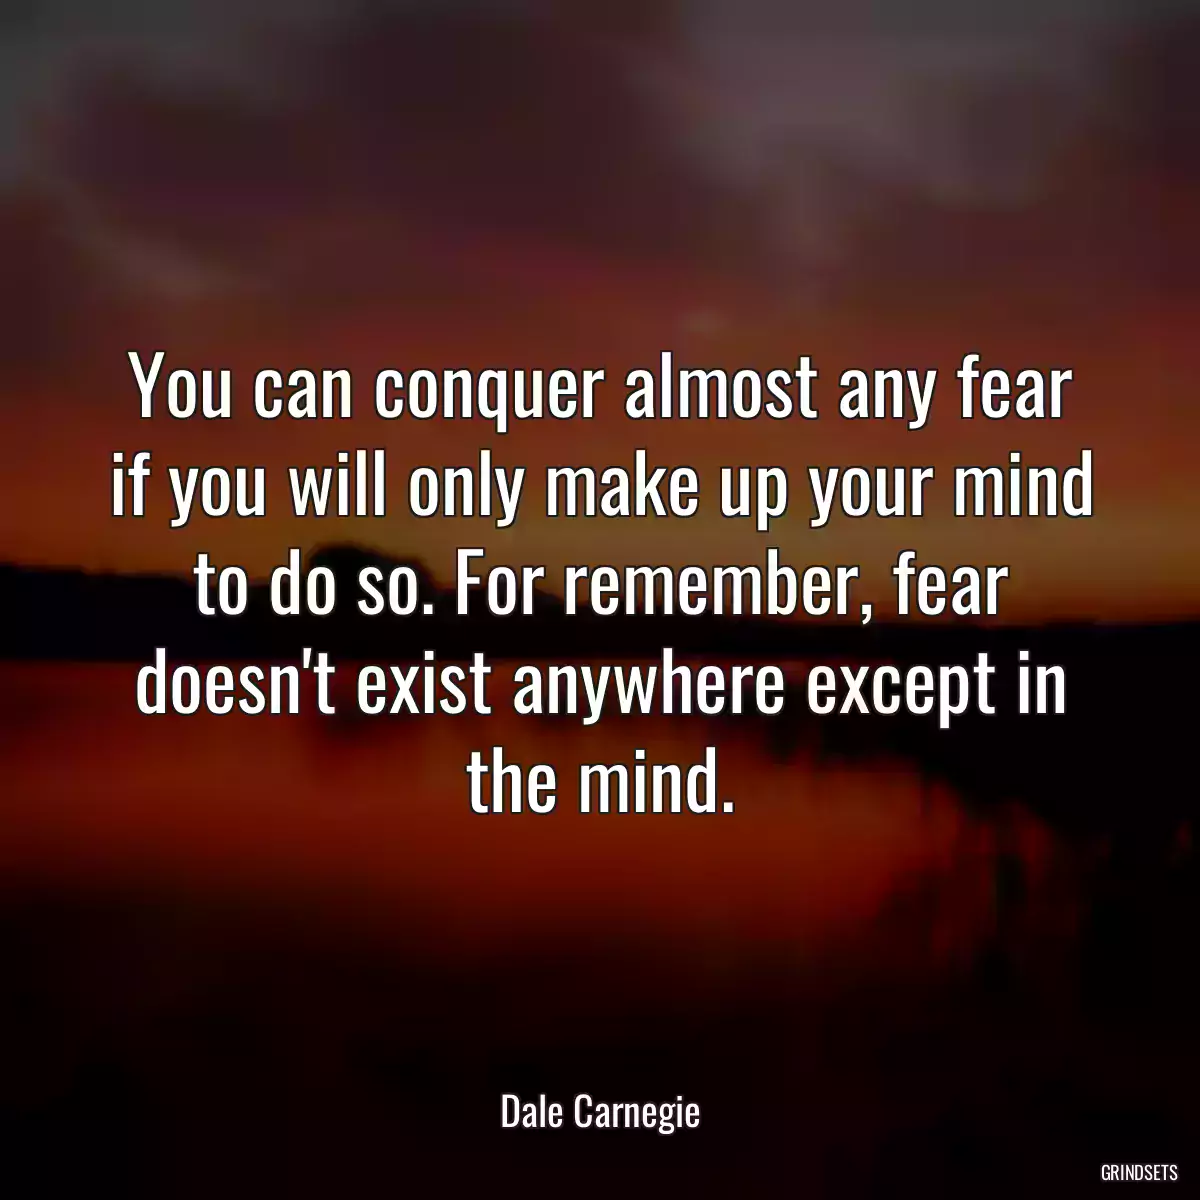 You can conquer almost any fear if you will only make up your mind to do so. For remember, fear doesn\'t exist anywhere except in the mind.